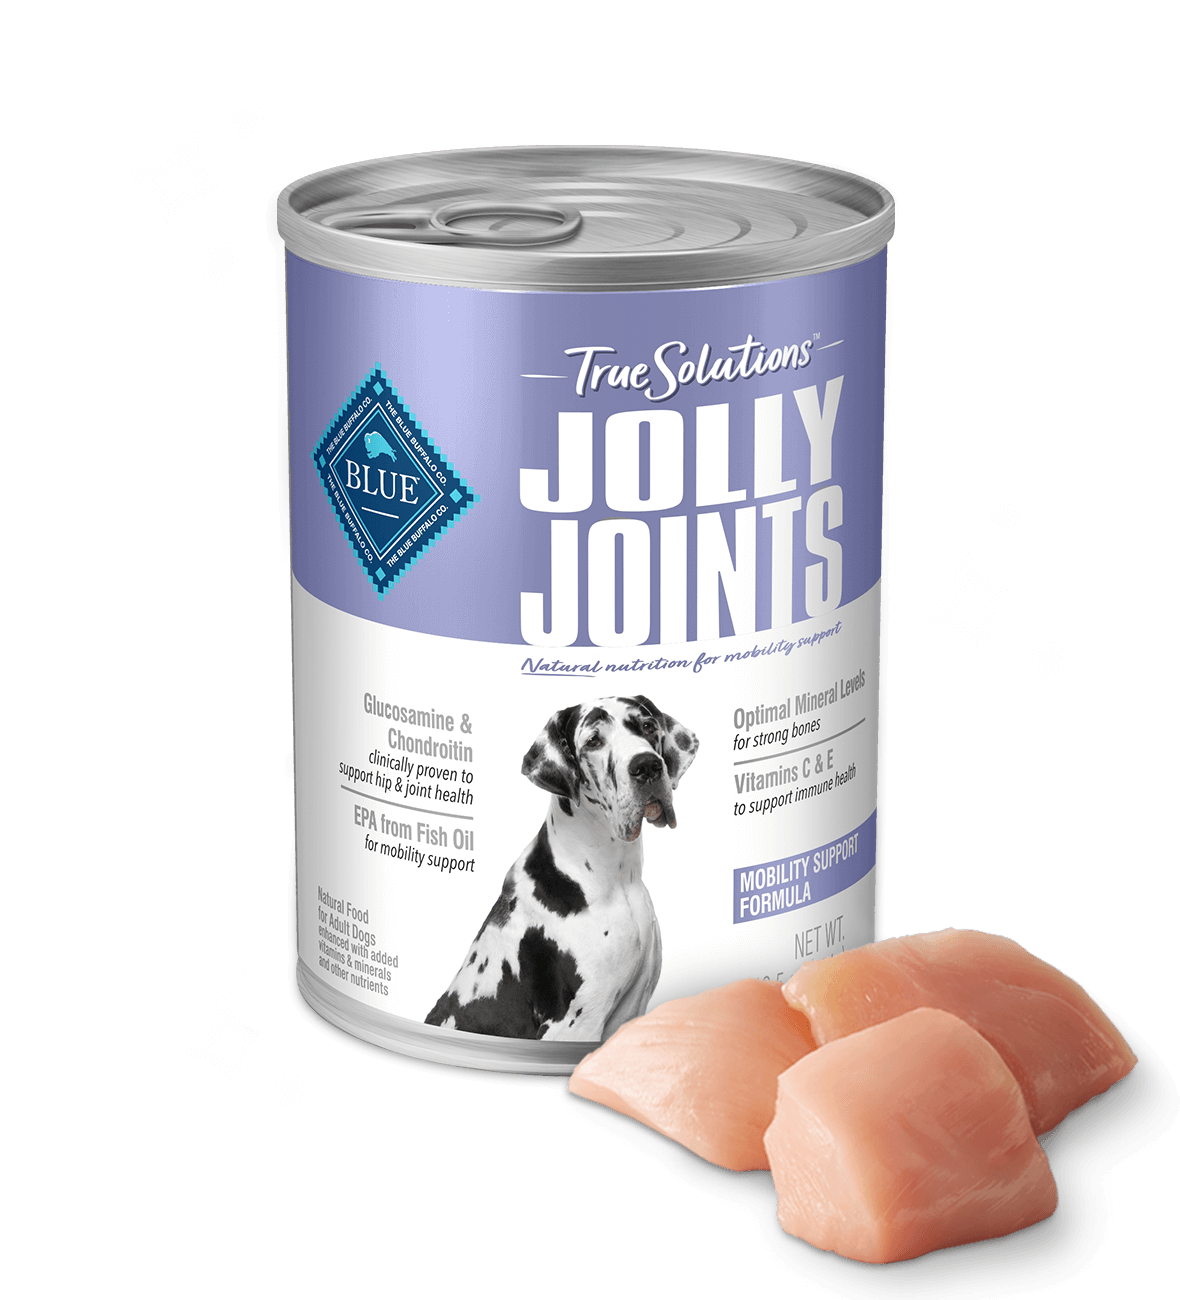 True solutions jolly joints wet dog food